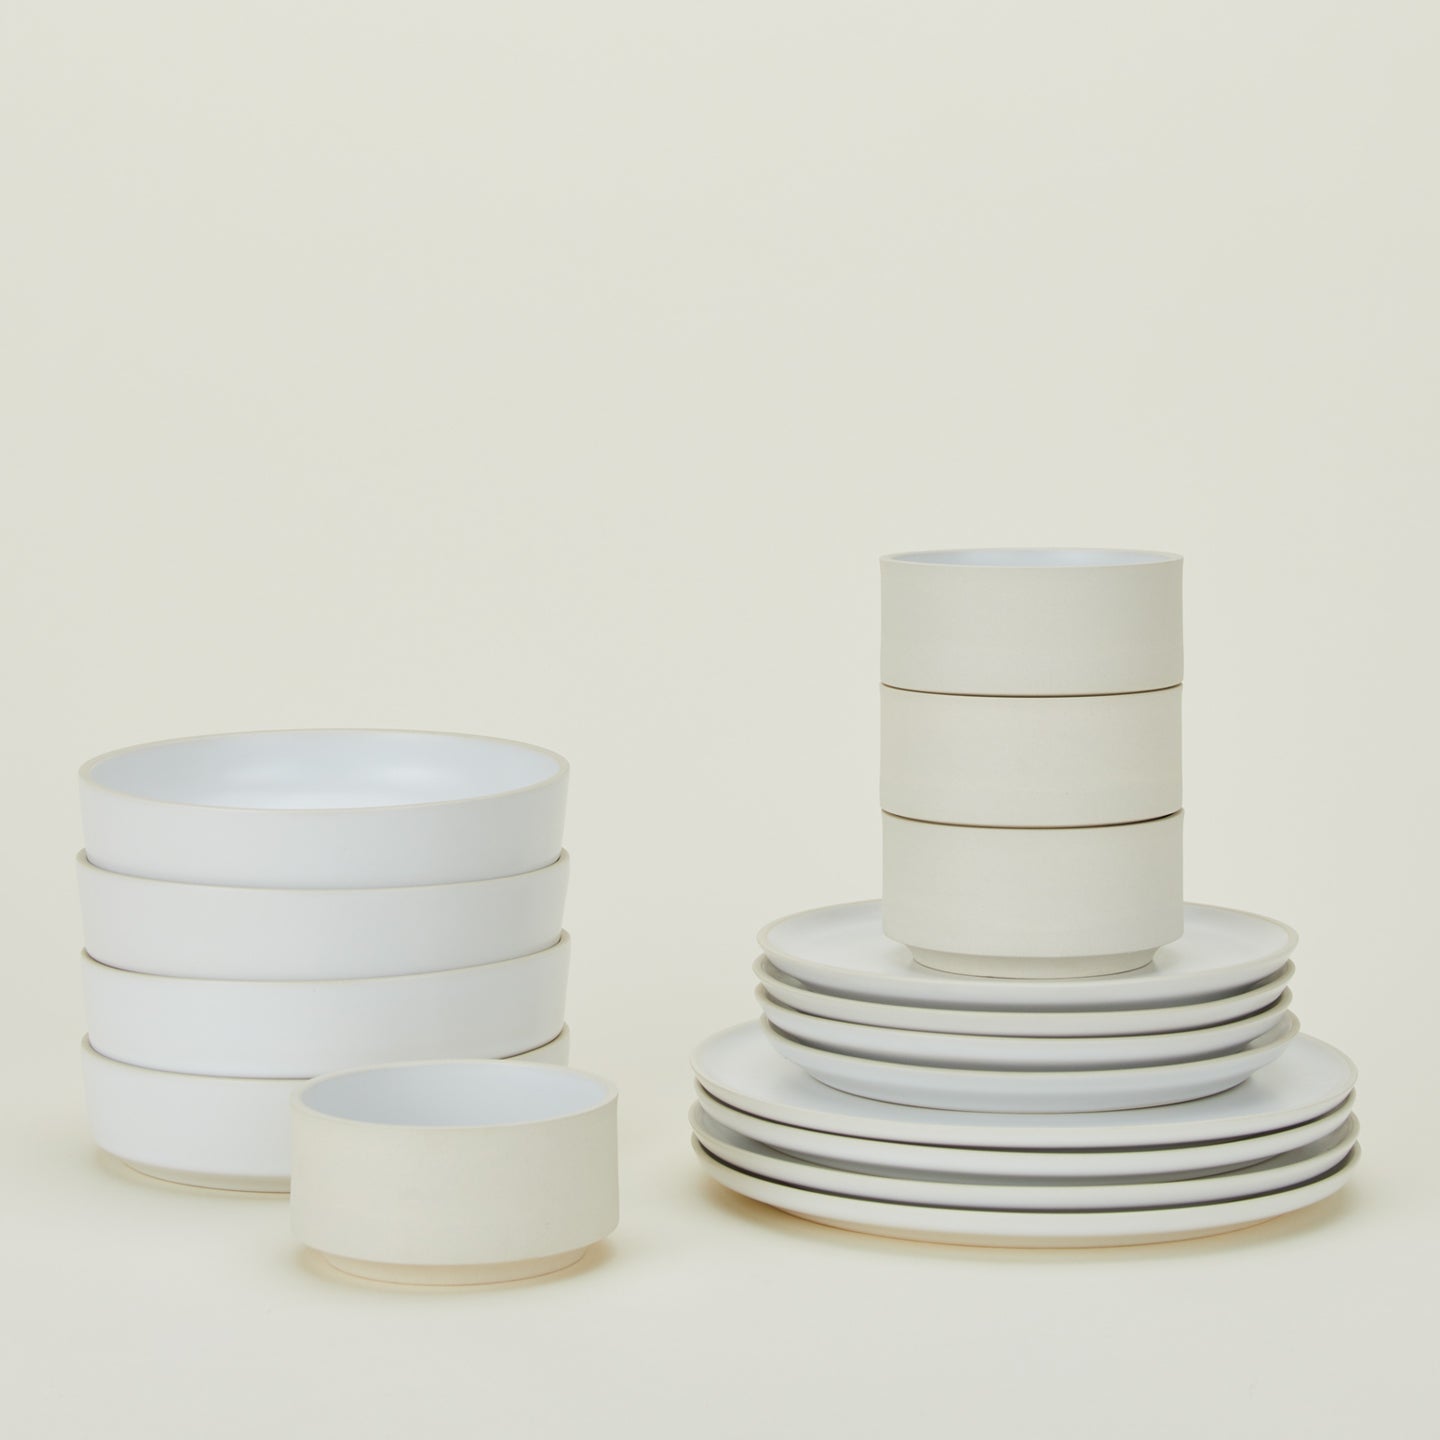 Stacked group of Modernist Dinnerware including four each low bowls, cereal bowls, salad plates and dinner plates.